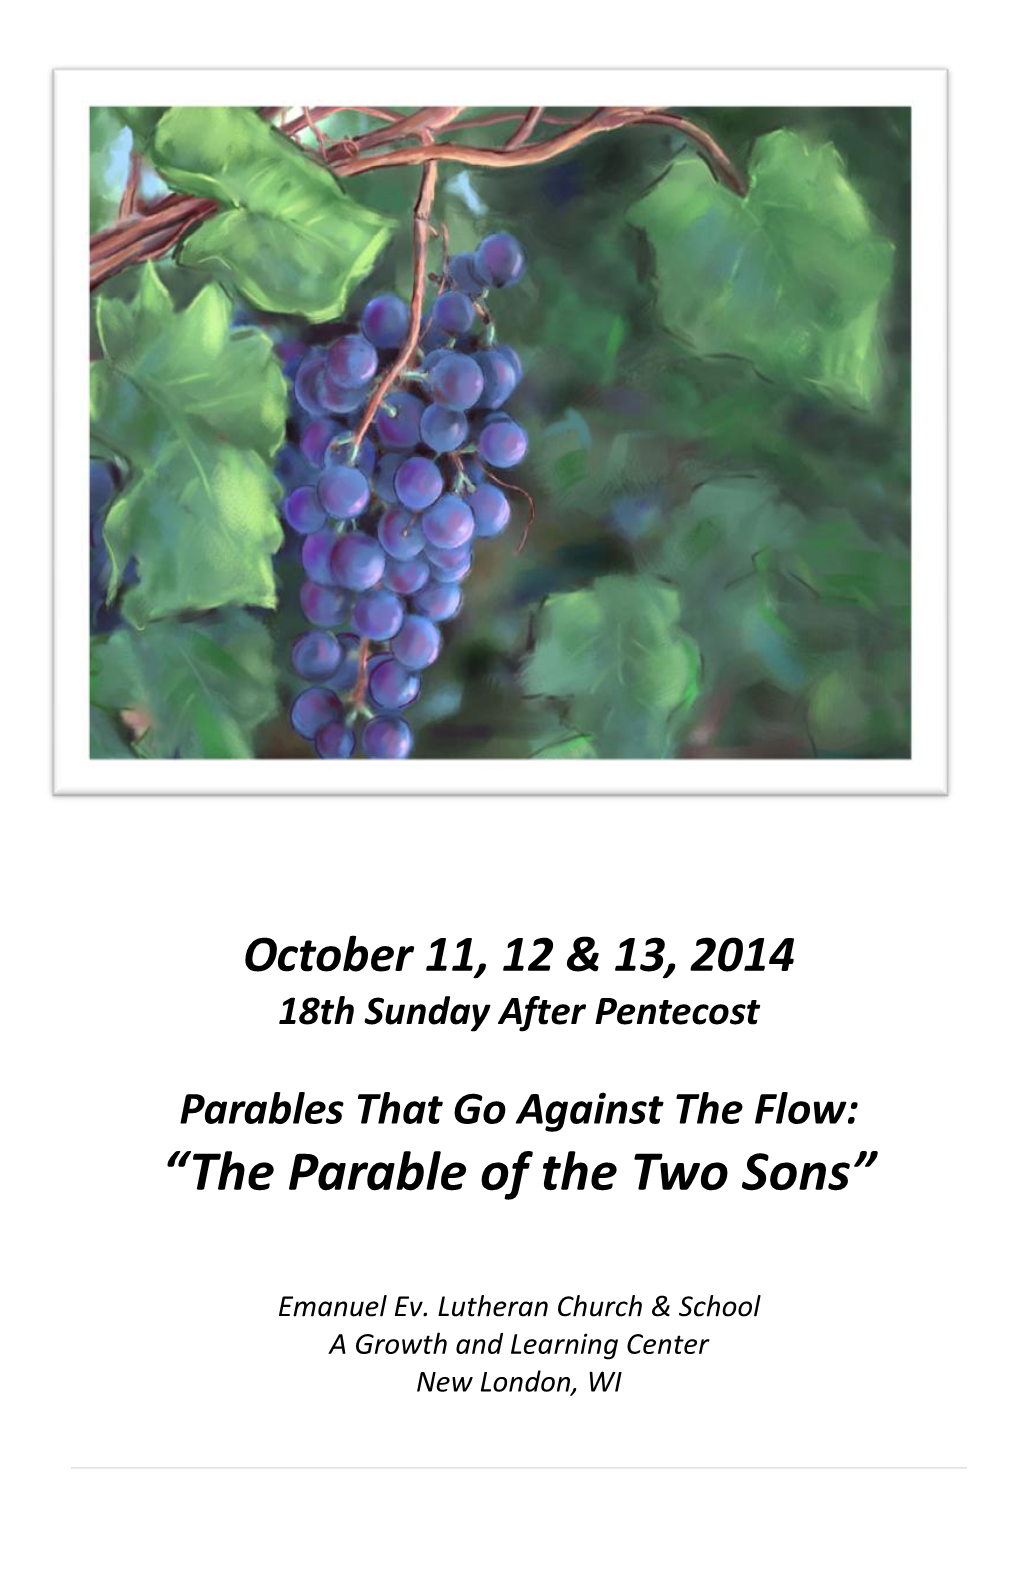 “The Parable of the Two Sons”